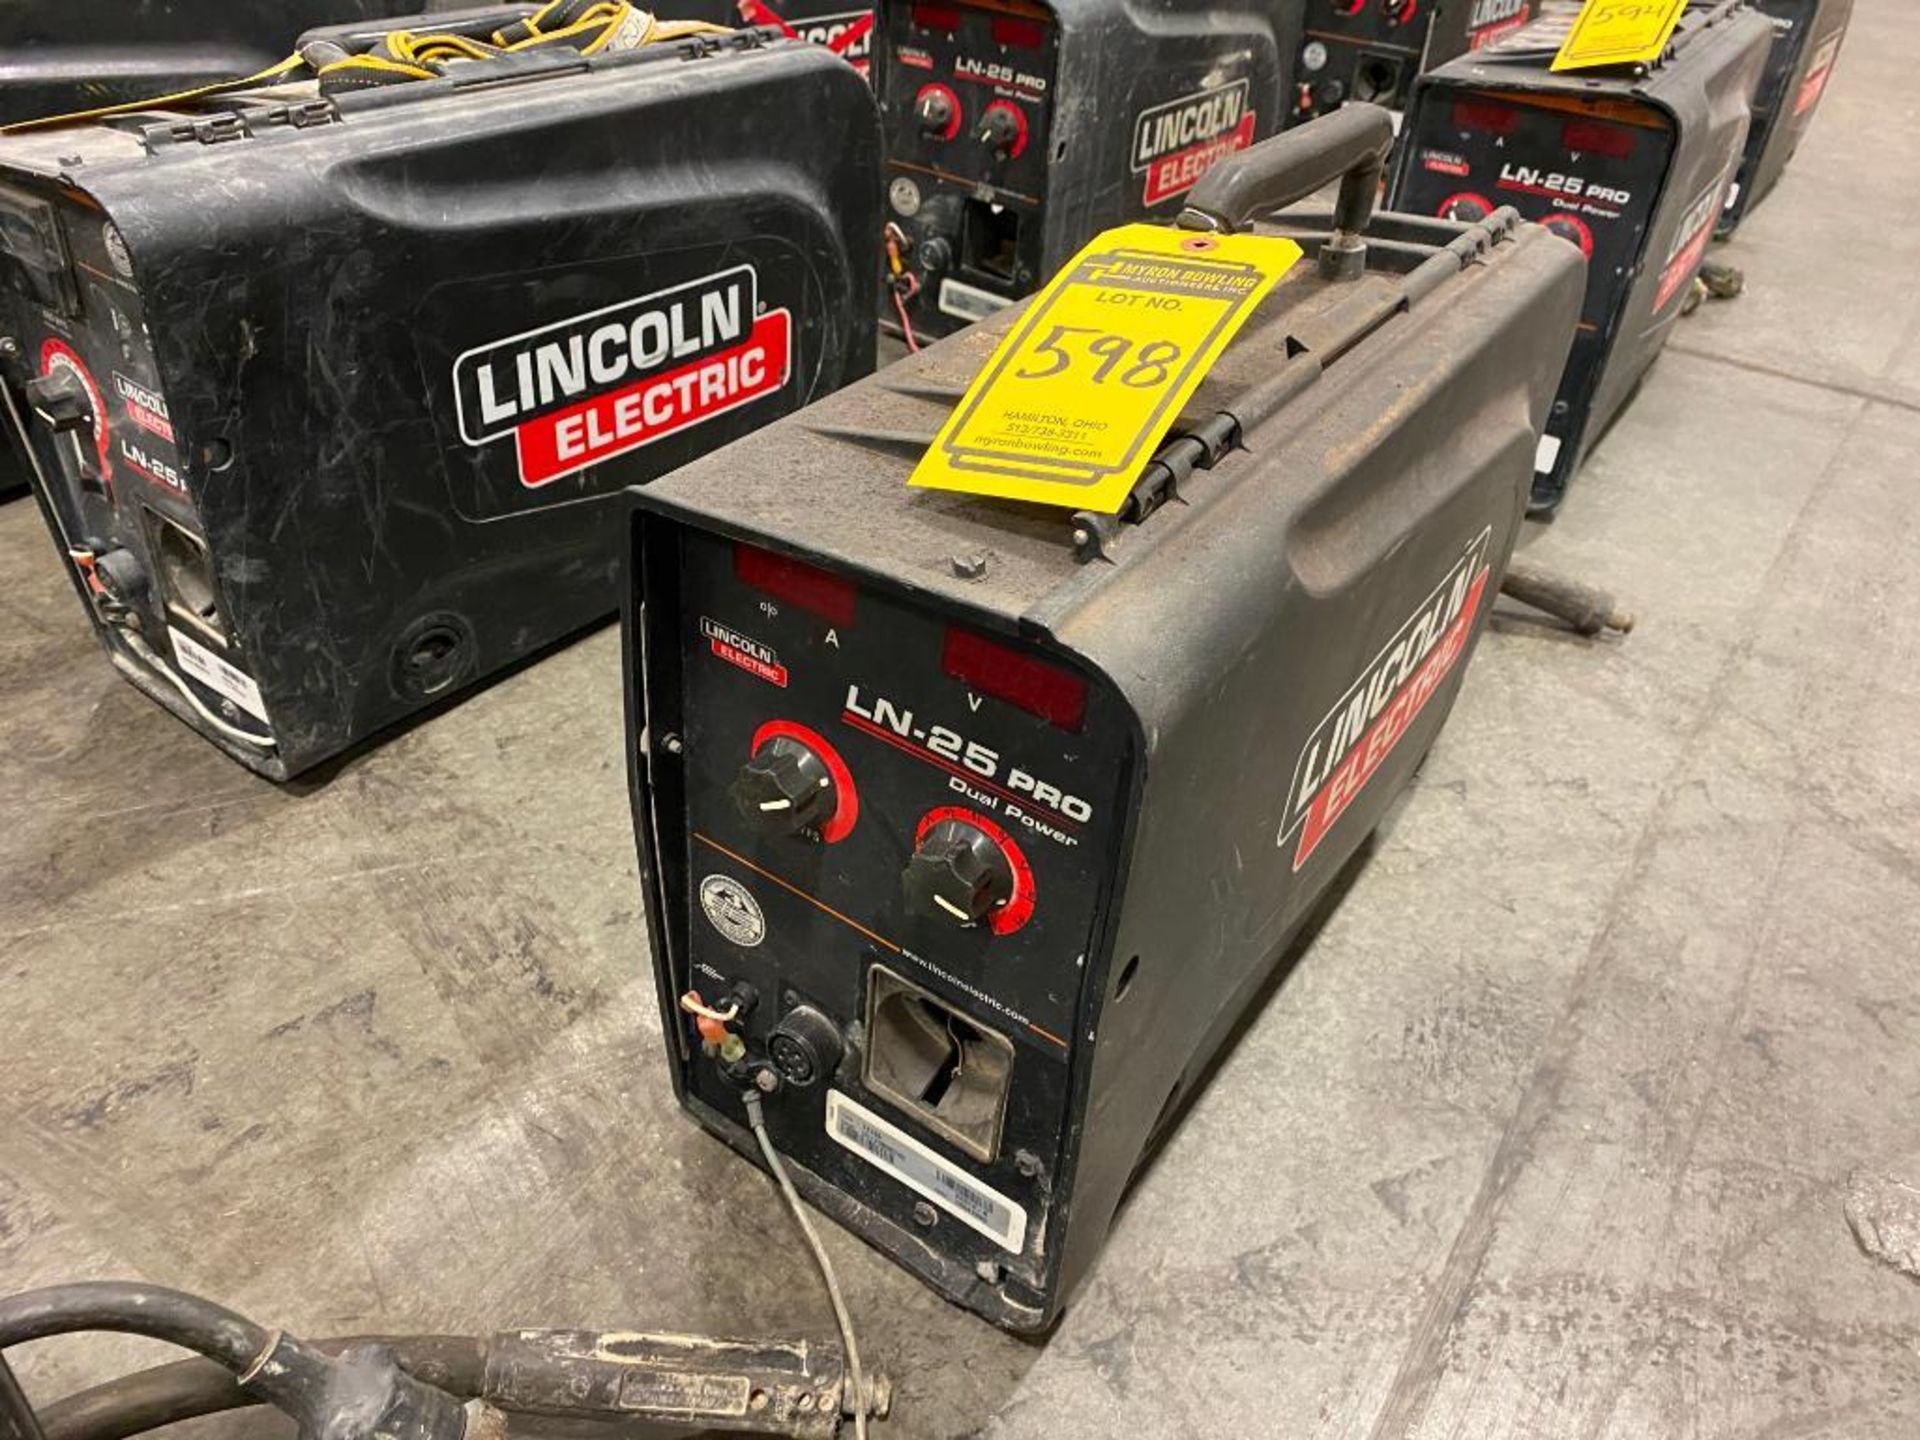 Lincoln LN-25 Pro Dual Power Wire Feeder Suitcase Welder, S/N U1170808743 - Image 2 of 3